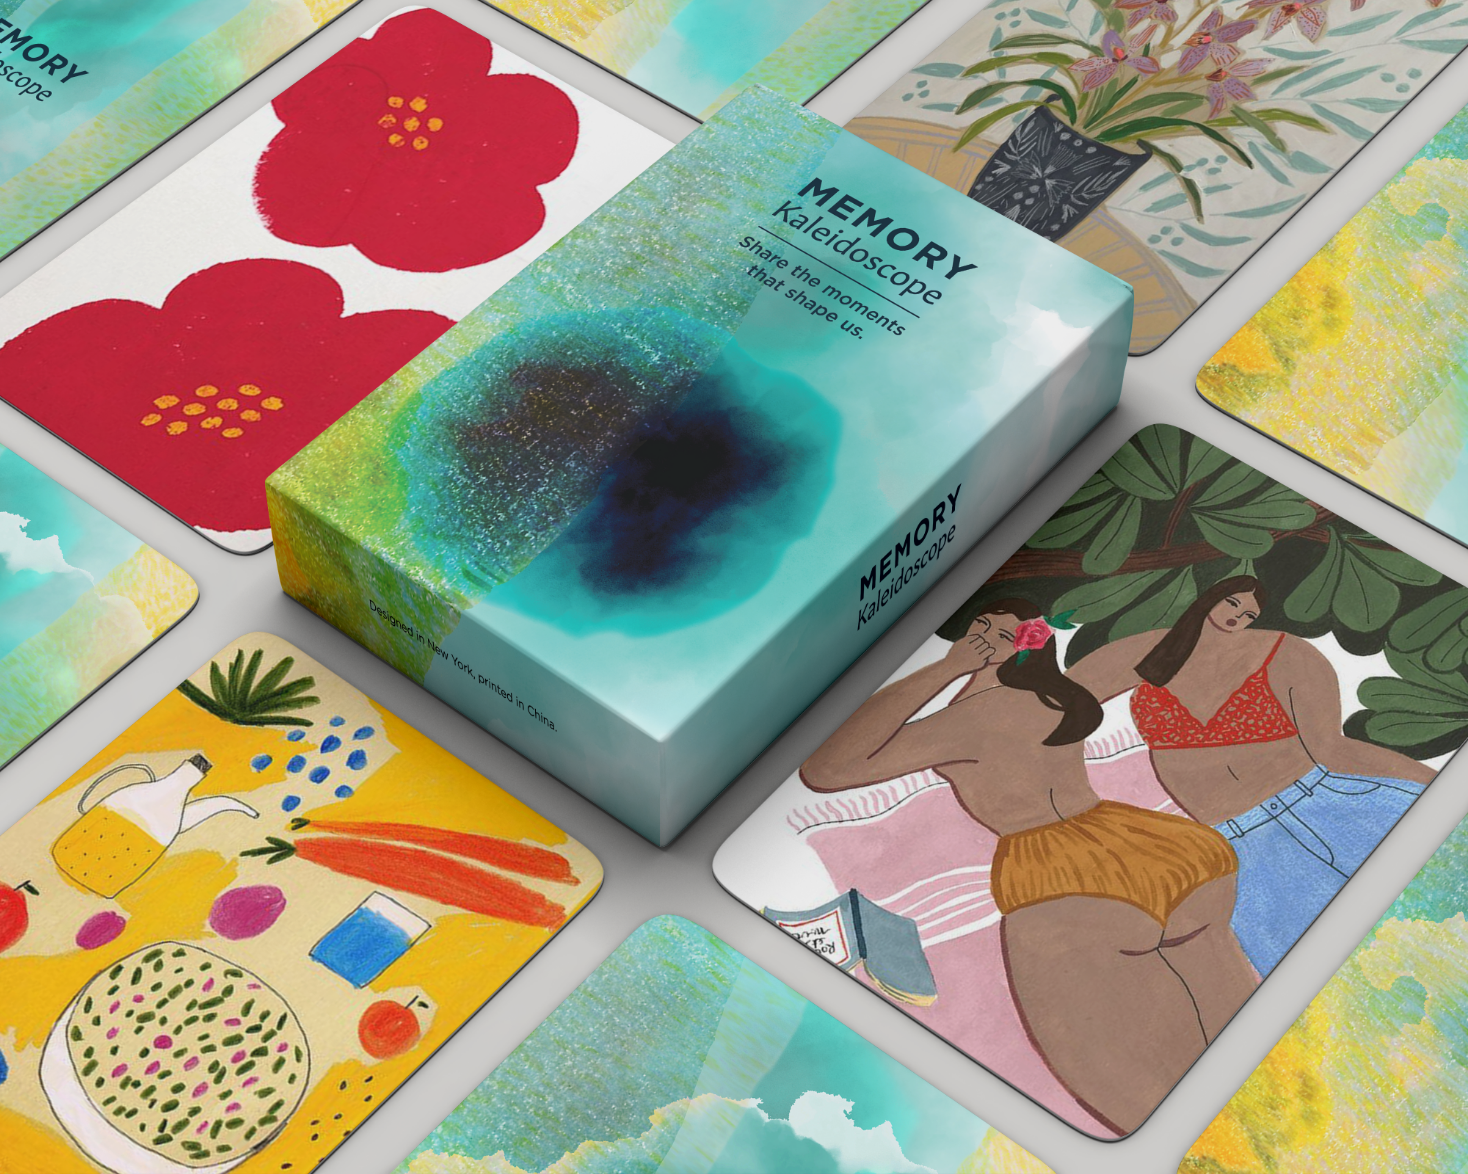 Memory Kaleidoscope, a card game by design dream lab and Talia Souki